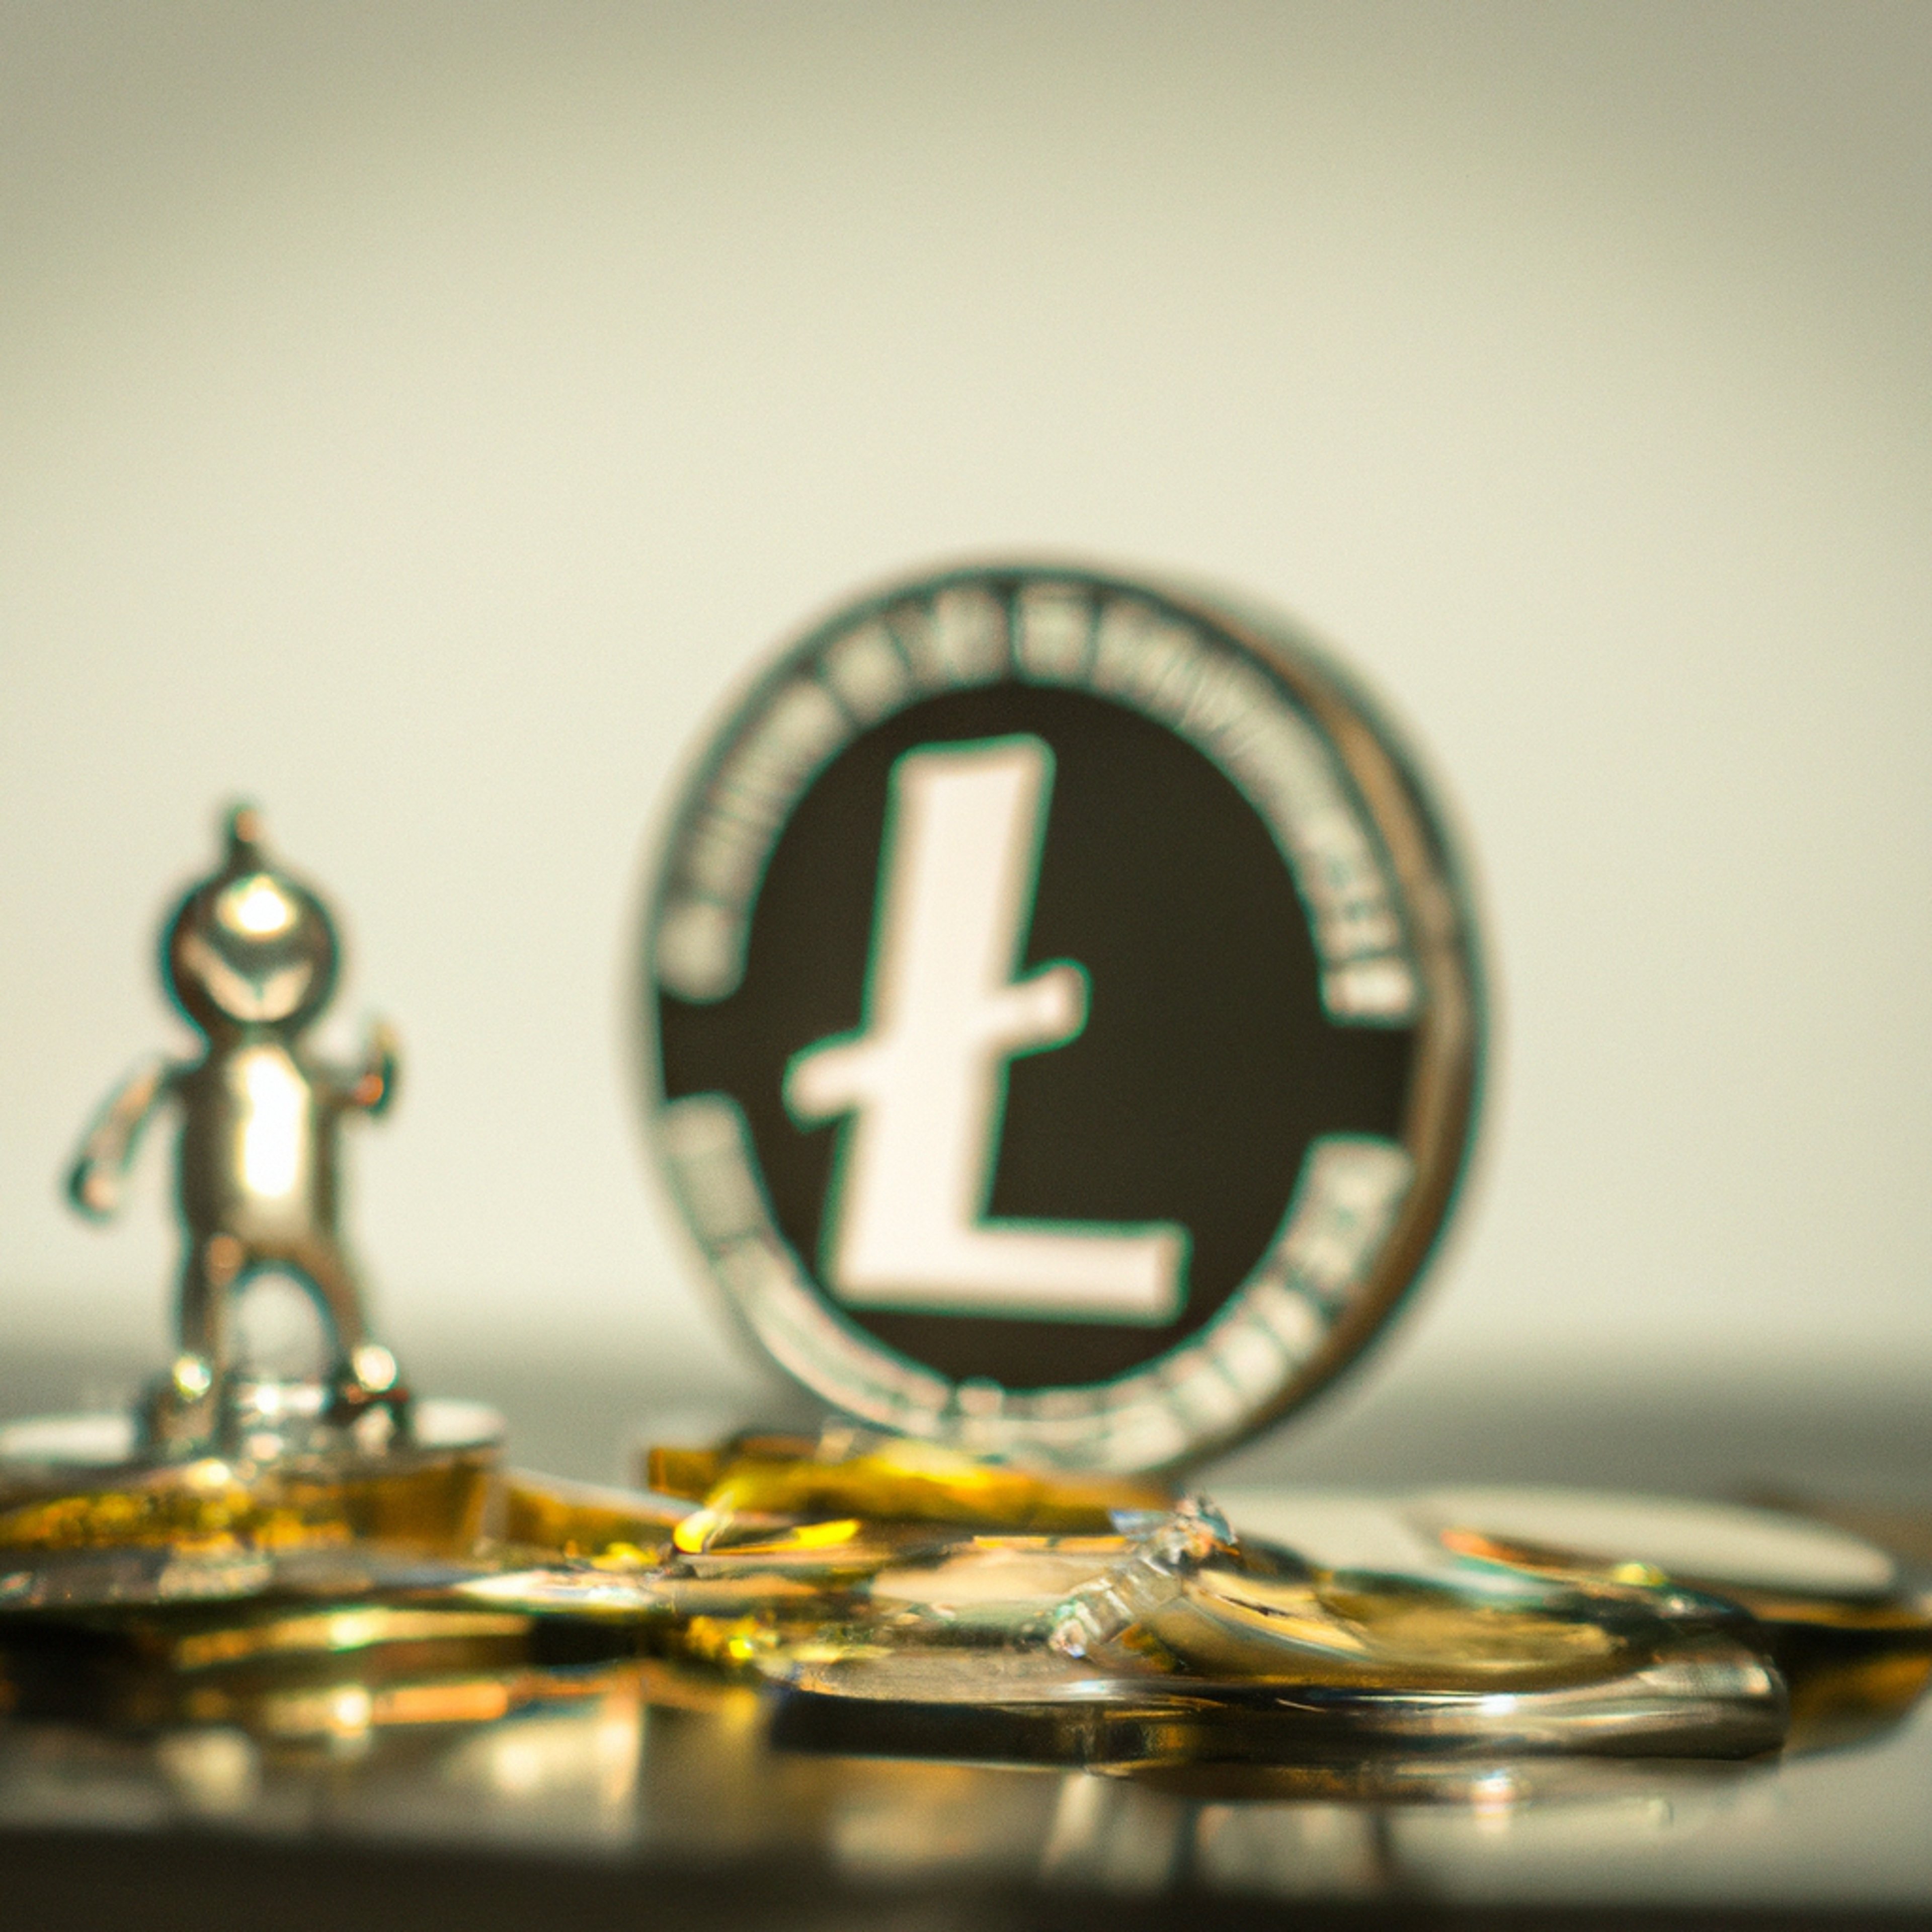 Litecoin Classified as a Commodity by CFTC in Lawsuit Against Binance, Community Celebrates Ahead of Halving